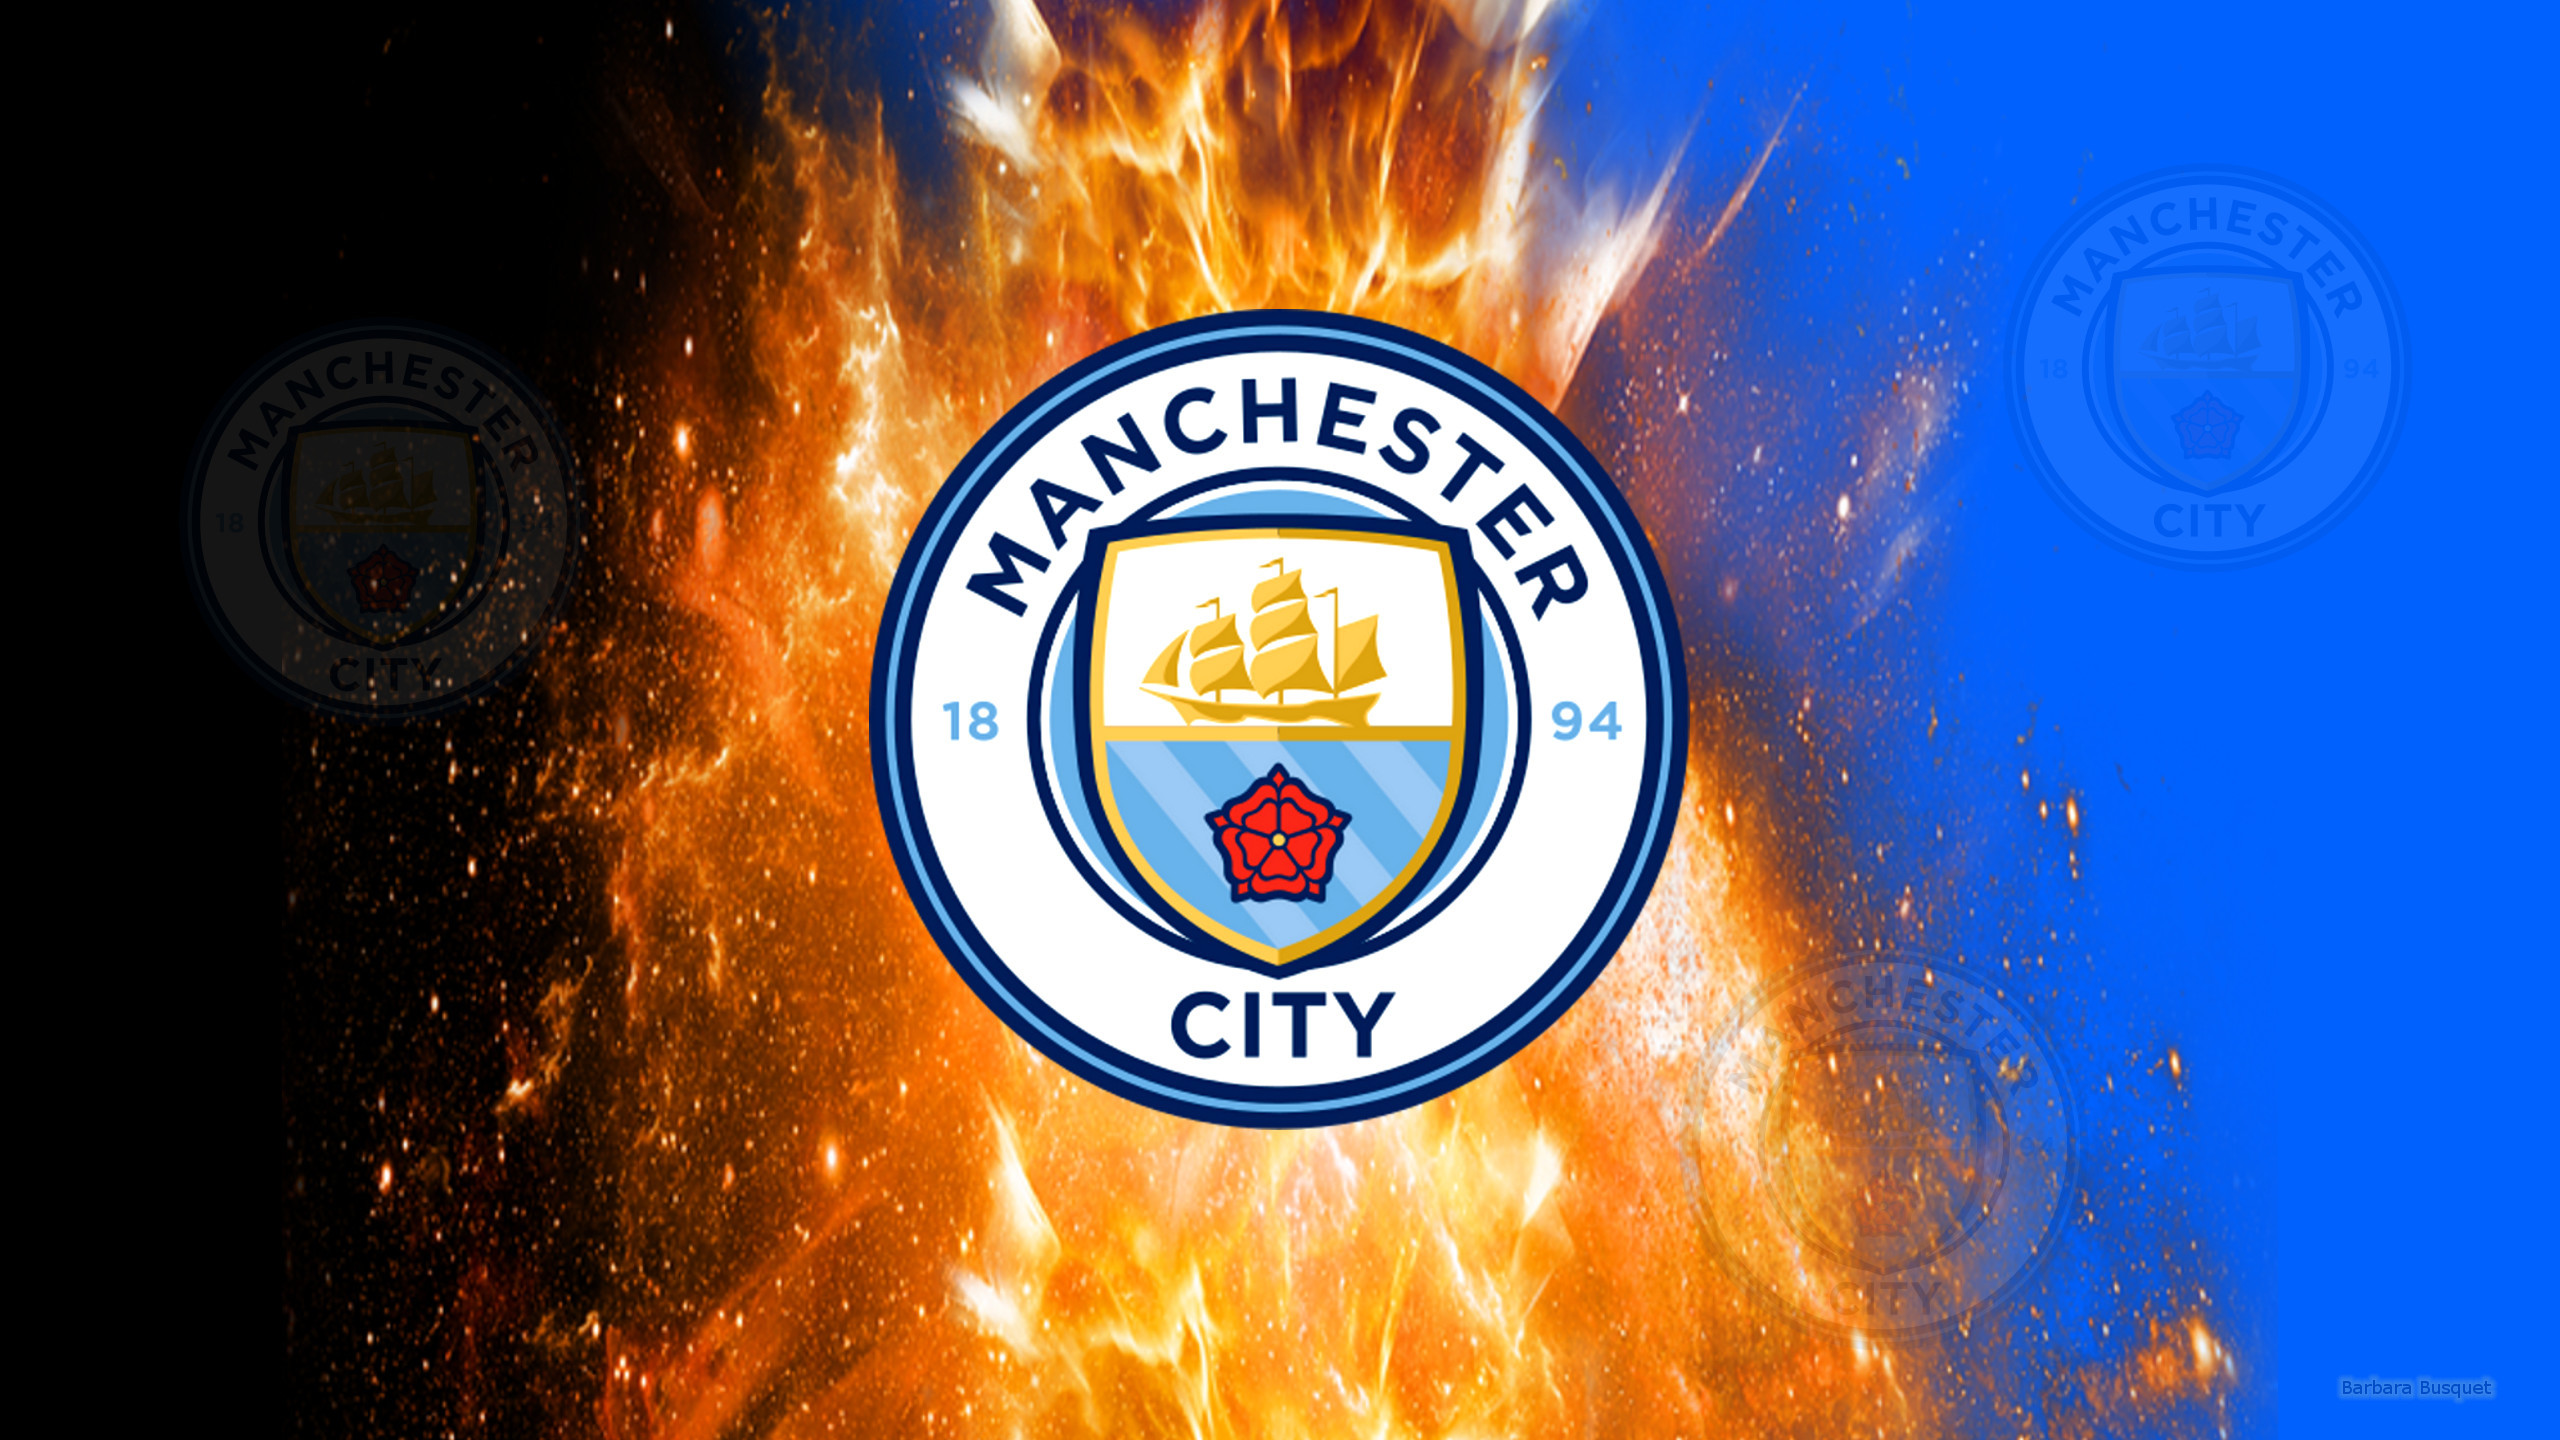 Black Blue Manchester City Wallpaper With Fire 2560x1440